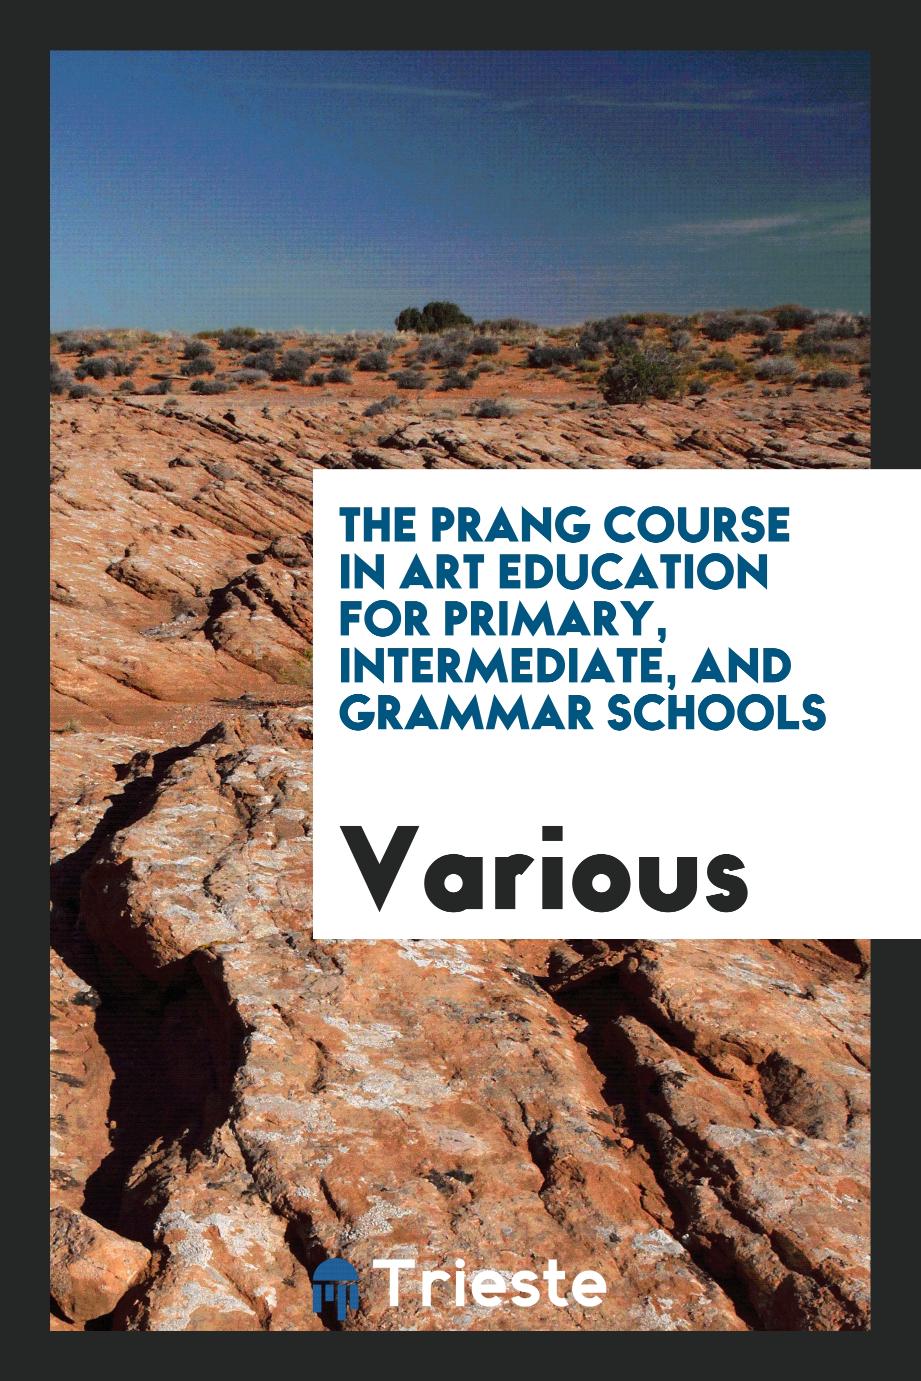 The Prang course in art education for primary, intermediate, and grammar schools